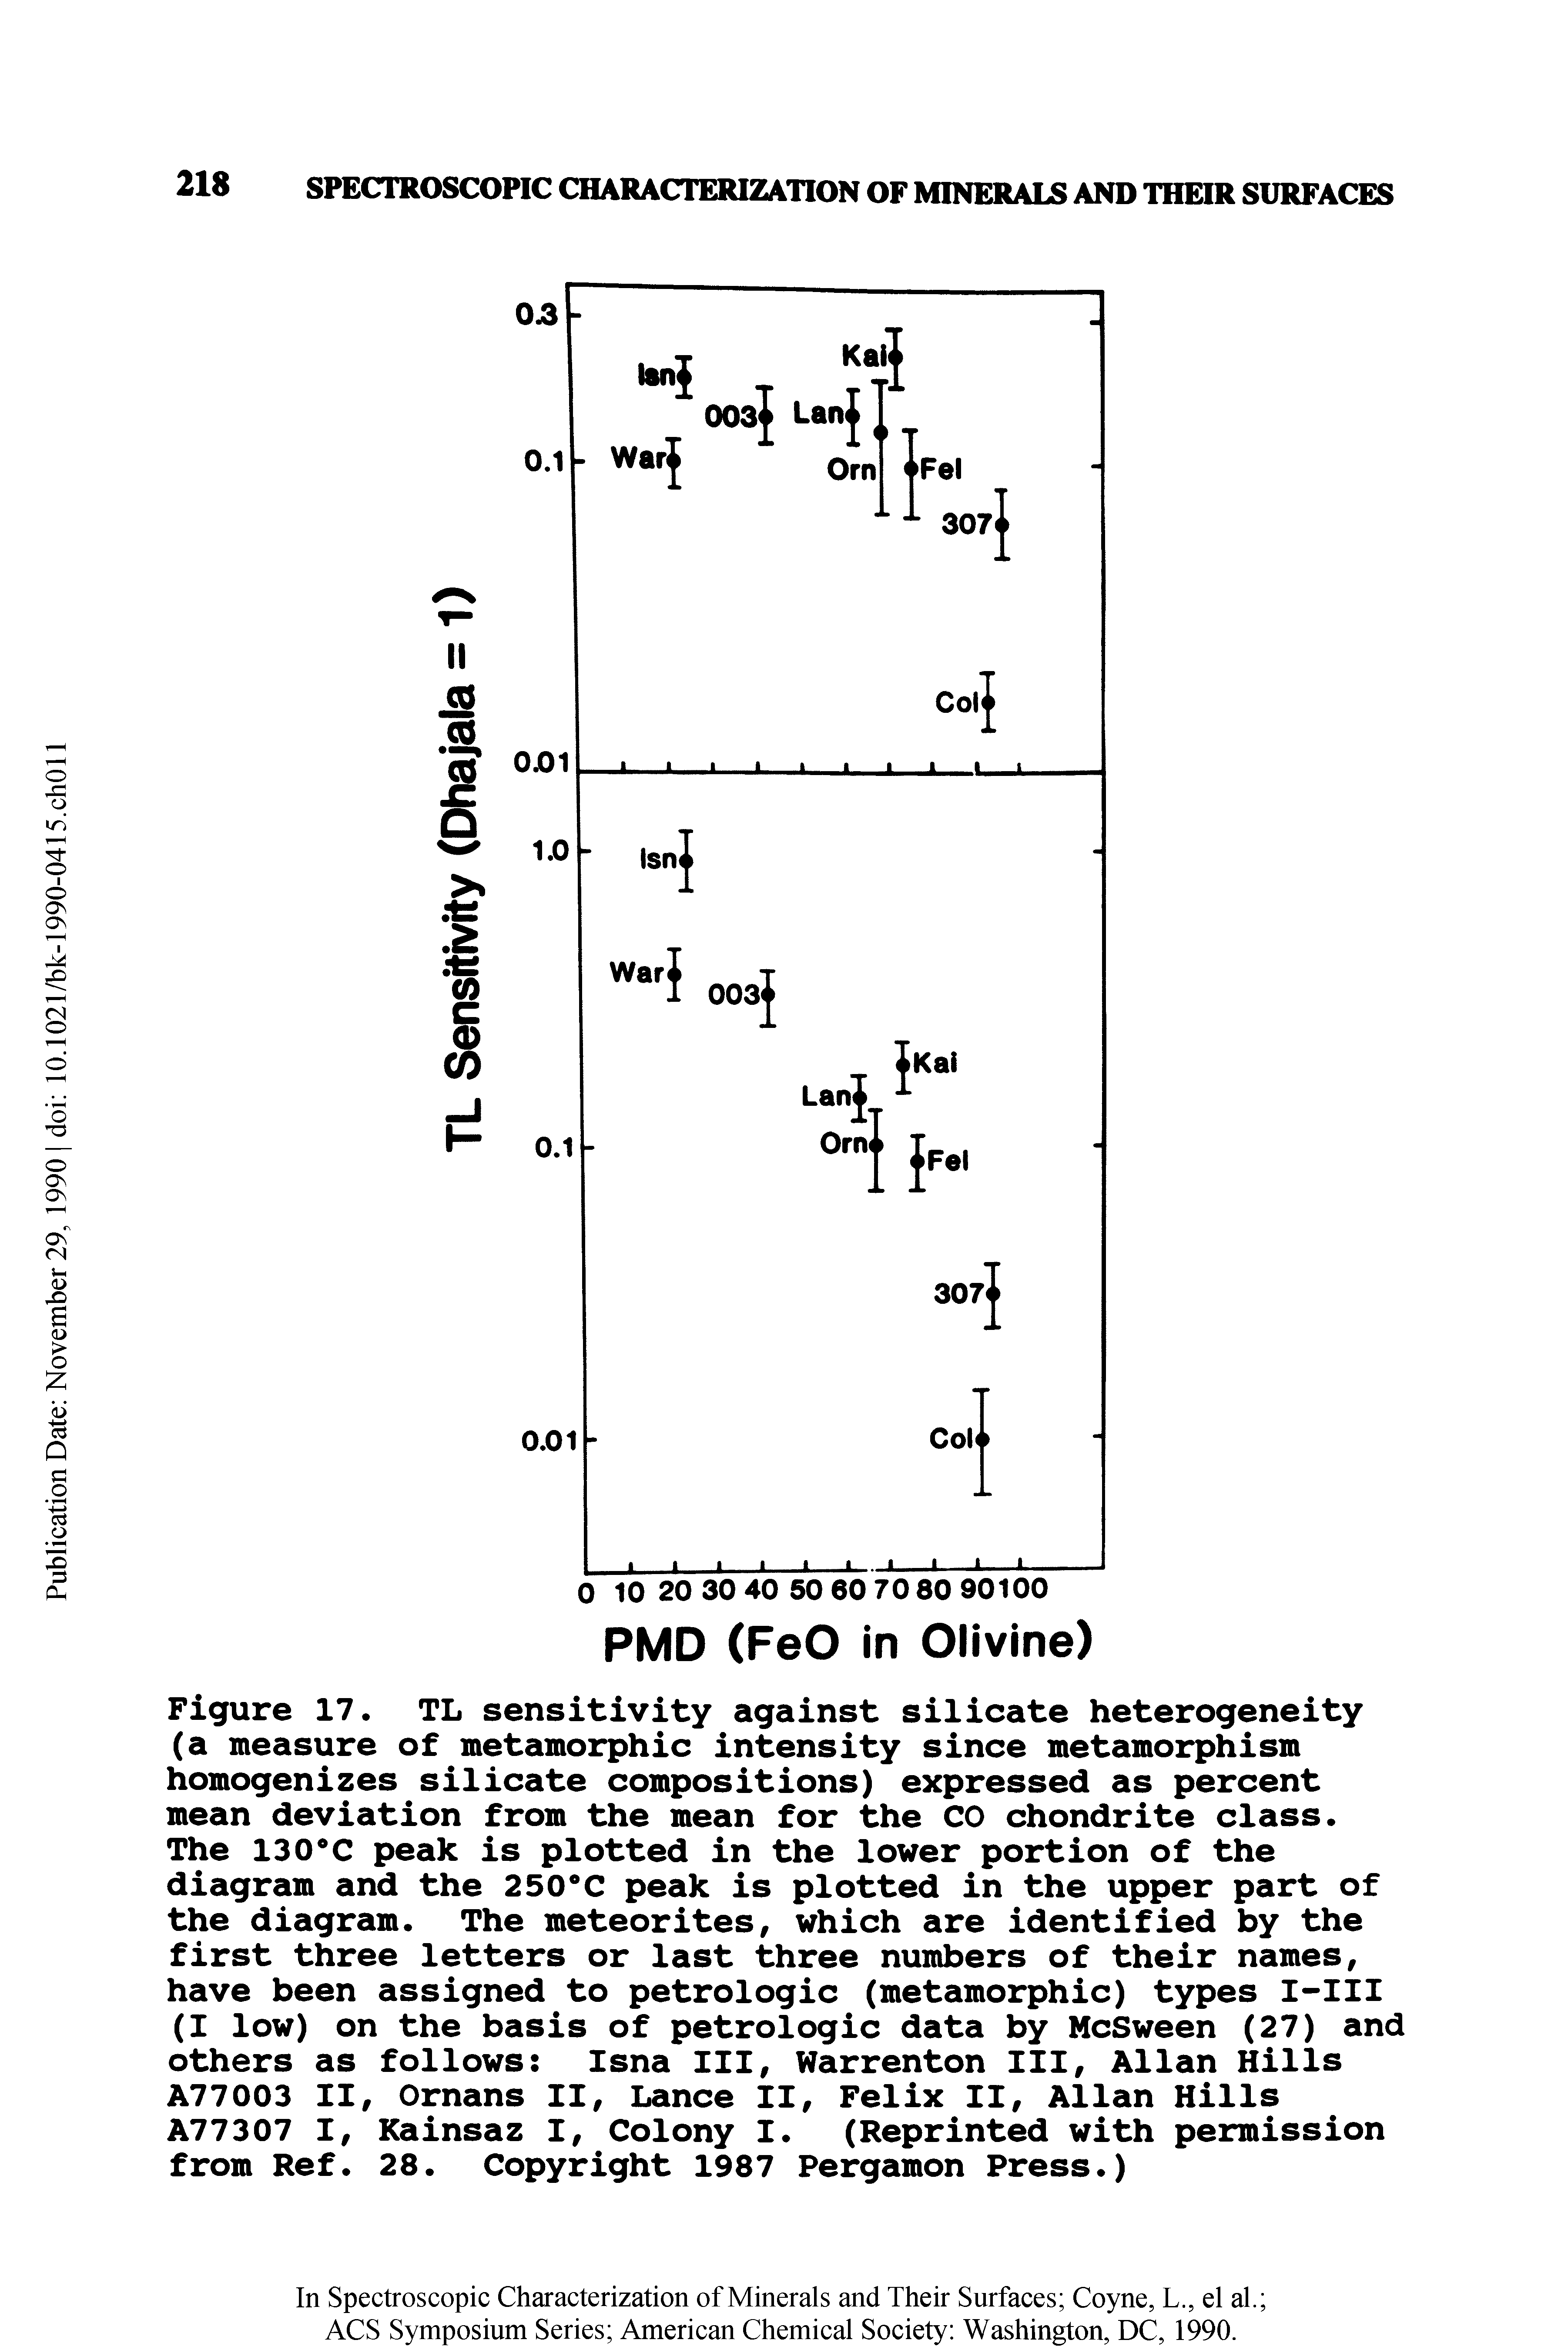 Figure 17. TL sensitivity against silicate heterogeneity (a measure of metamorphic intensity since metamorphism homogenizes silicate compositions) expressed as percent mean deviation from the mean for the CO chondrite class.